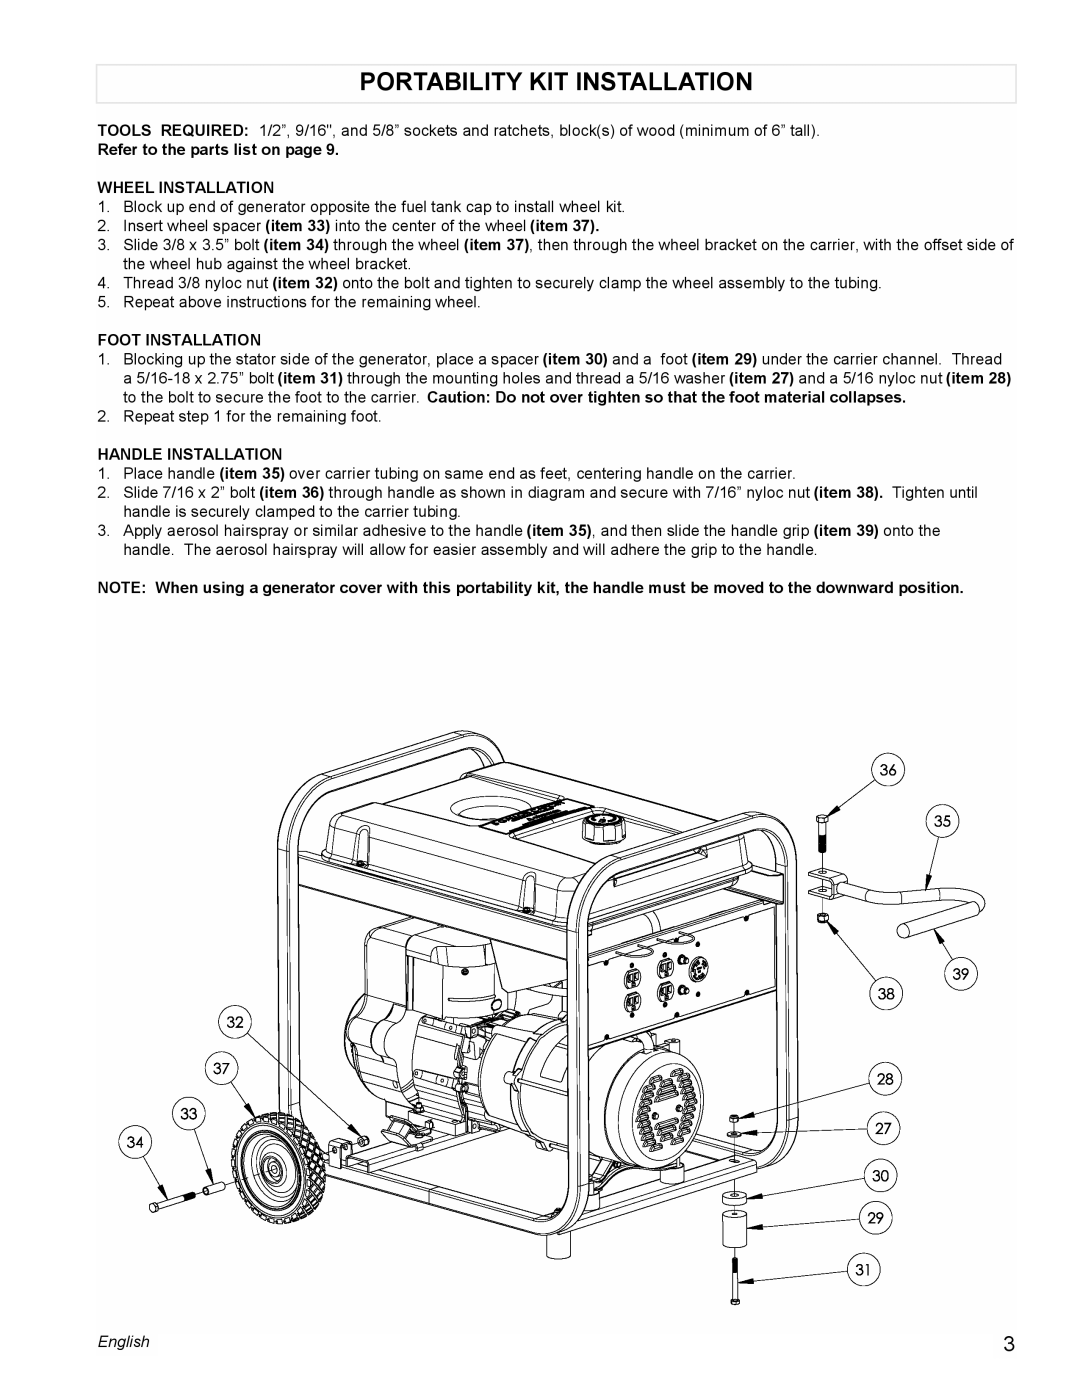 Powermate PM0525312.01 manual Portability Kit Installation, Refer to the parts list on page, Wheel Installation, English 